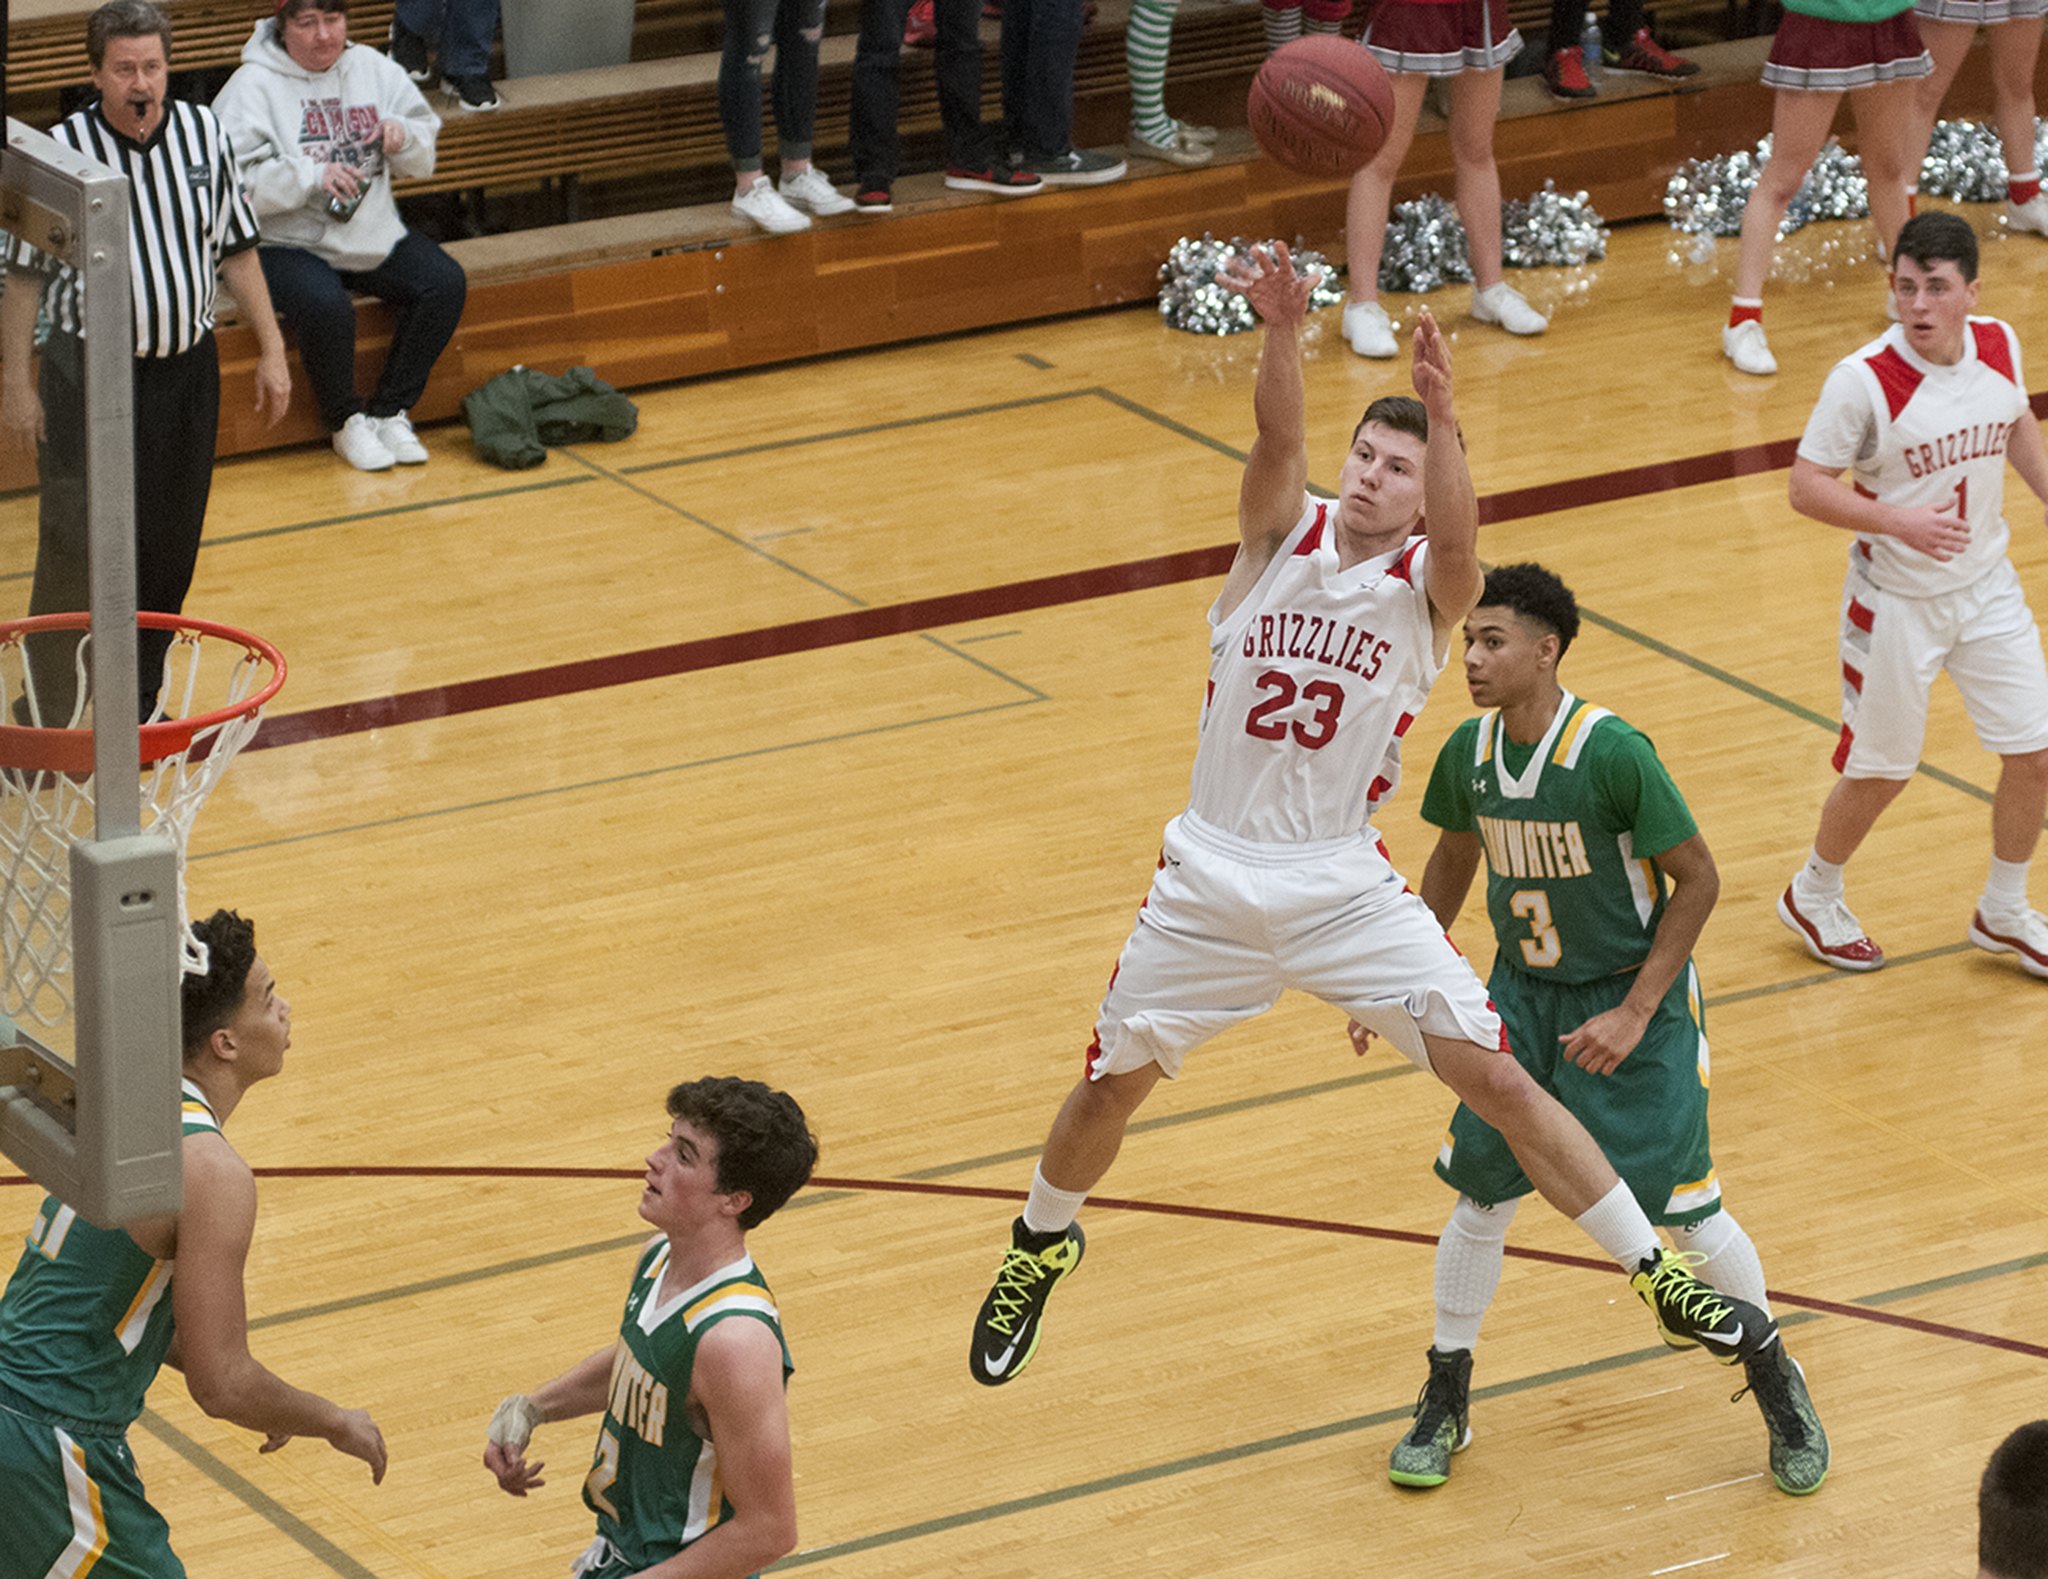 (Brendan Carl | The Daily World) Hoquiam’s Jack Adams III elevates to take a shot against Tumwater on Friday. The Thunderbirds defeated the Grizzlies 76-63.